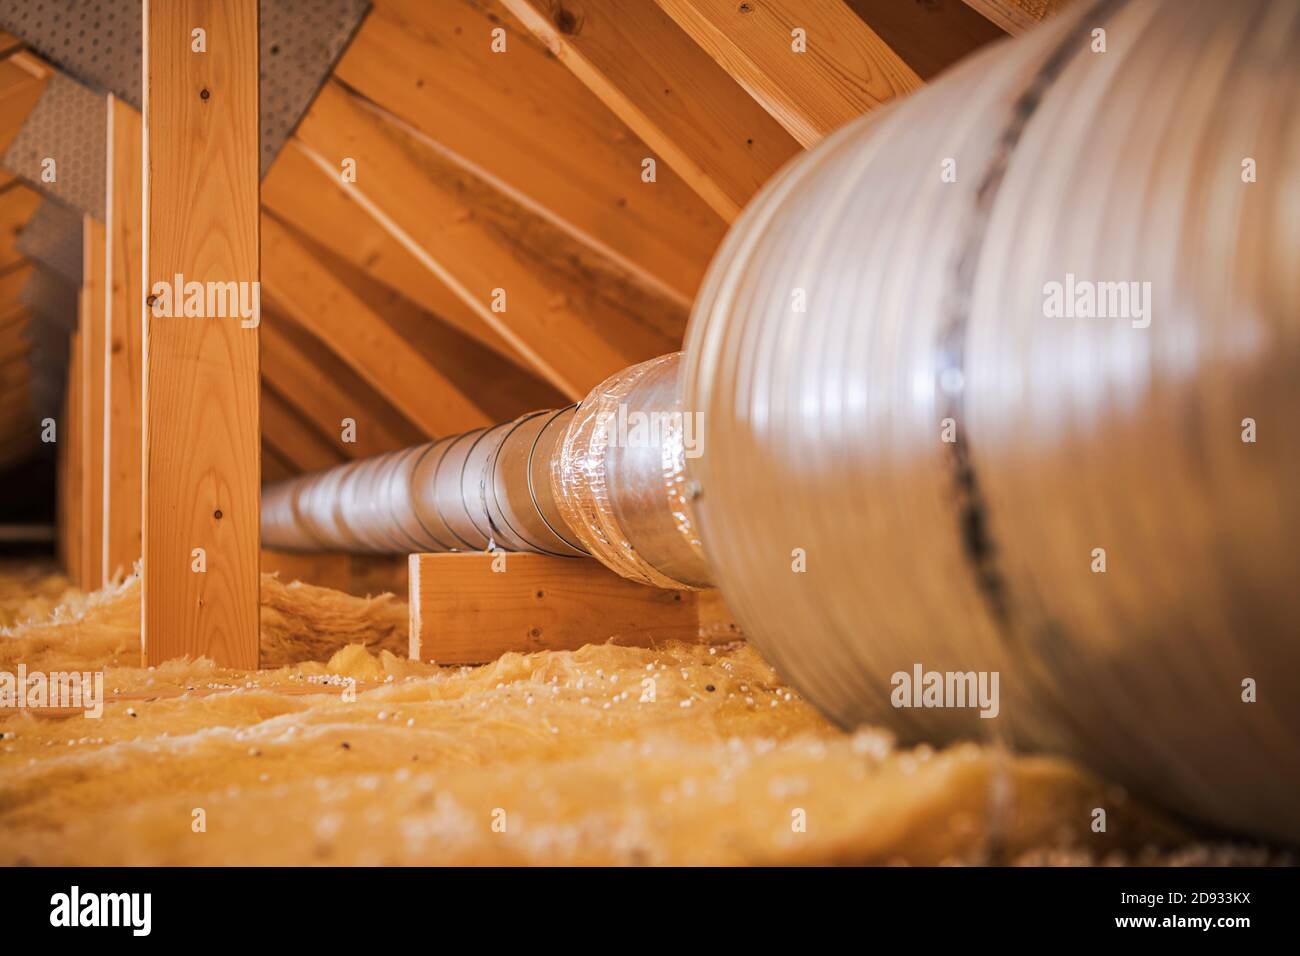 Attic Stainless Steel House Air Circulation Pipeline with Filter. HVAN Technologies Inside Modern Wooden Building. Stock Photo